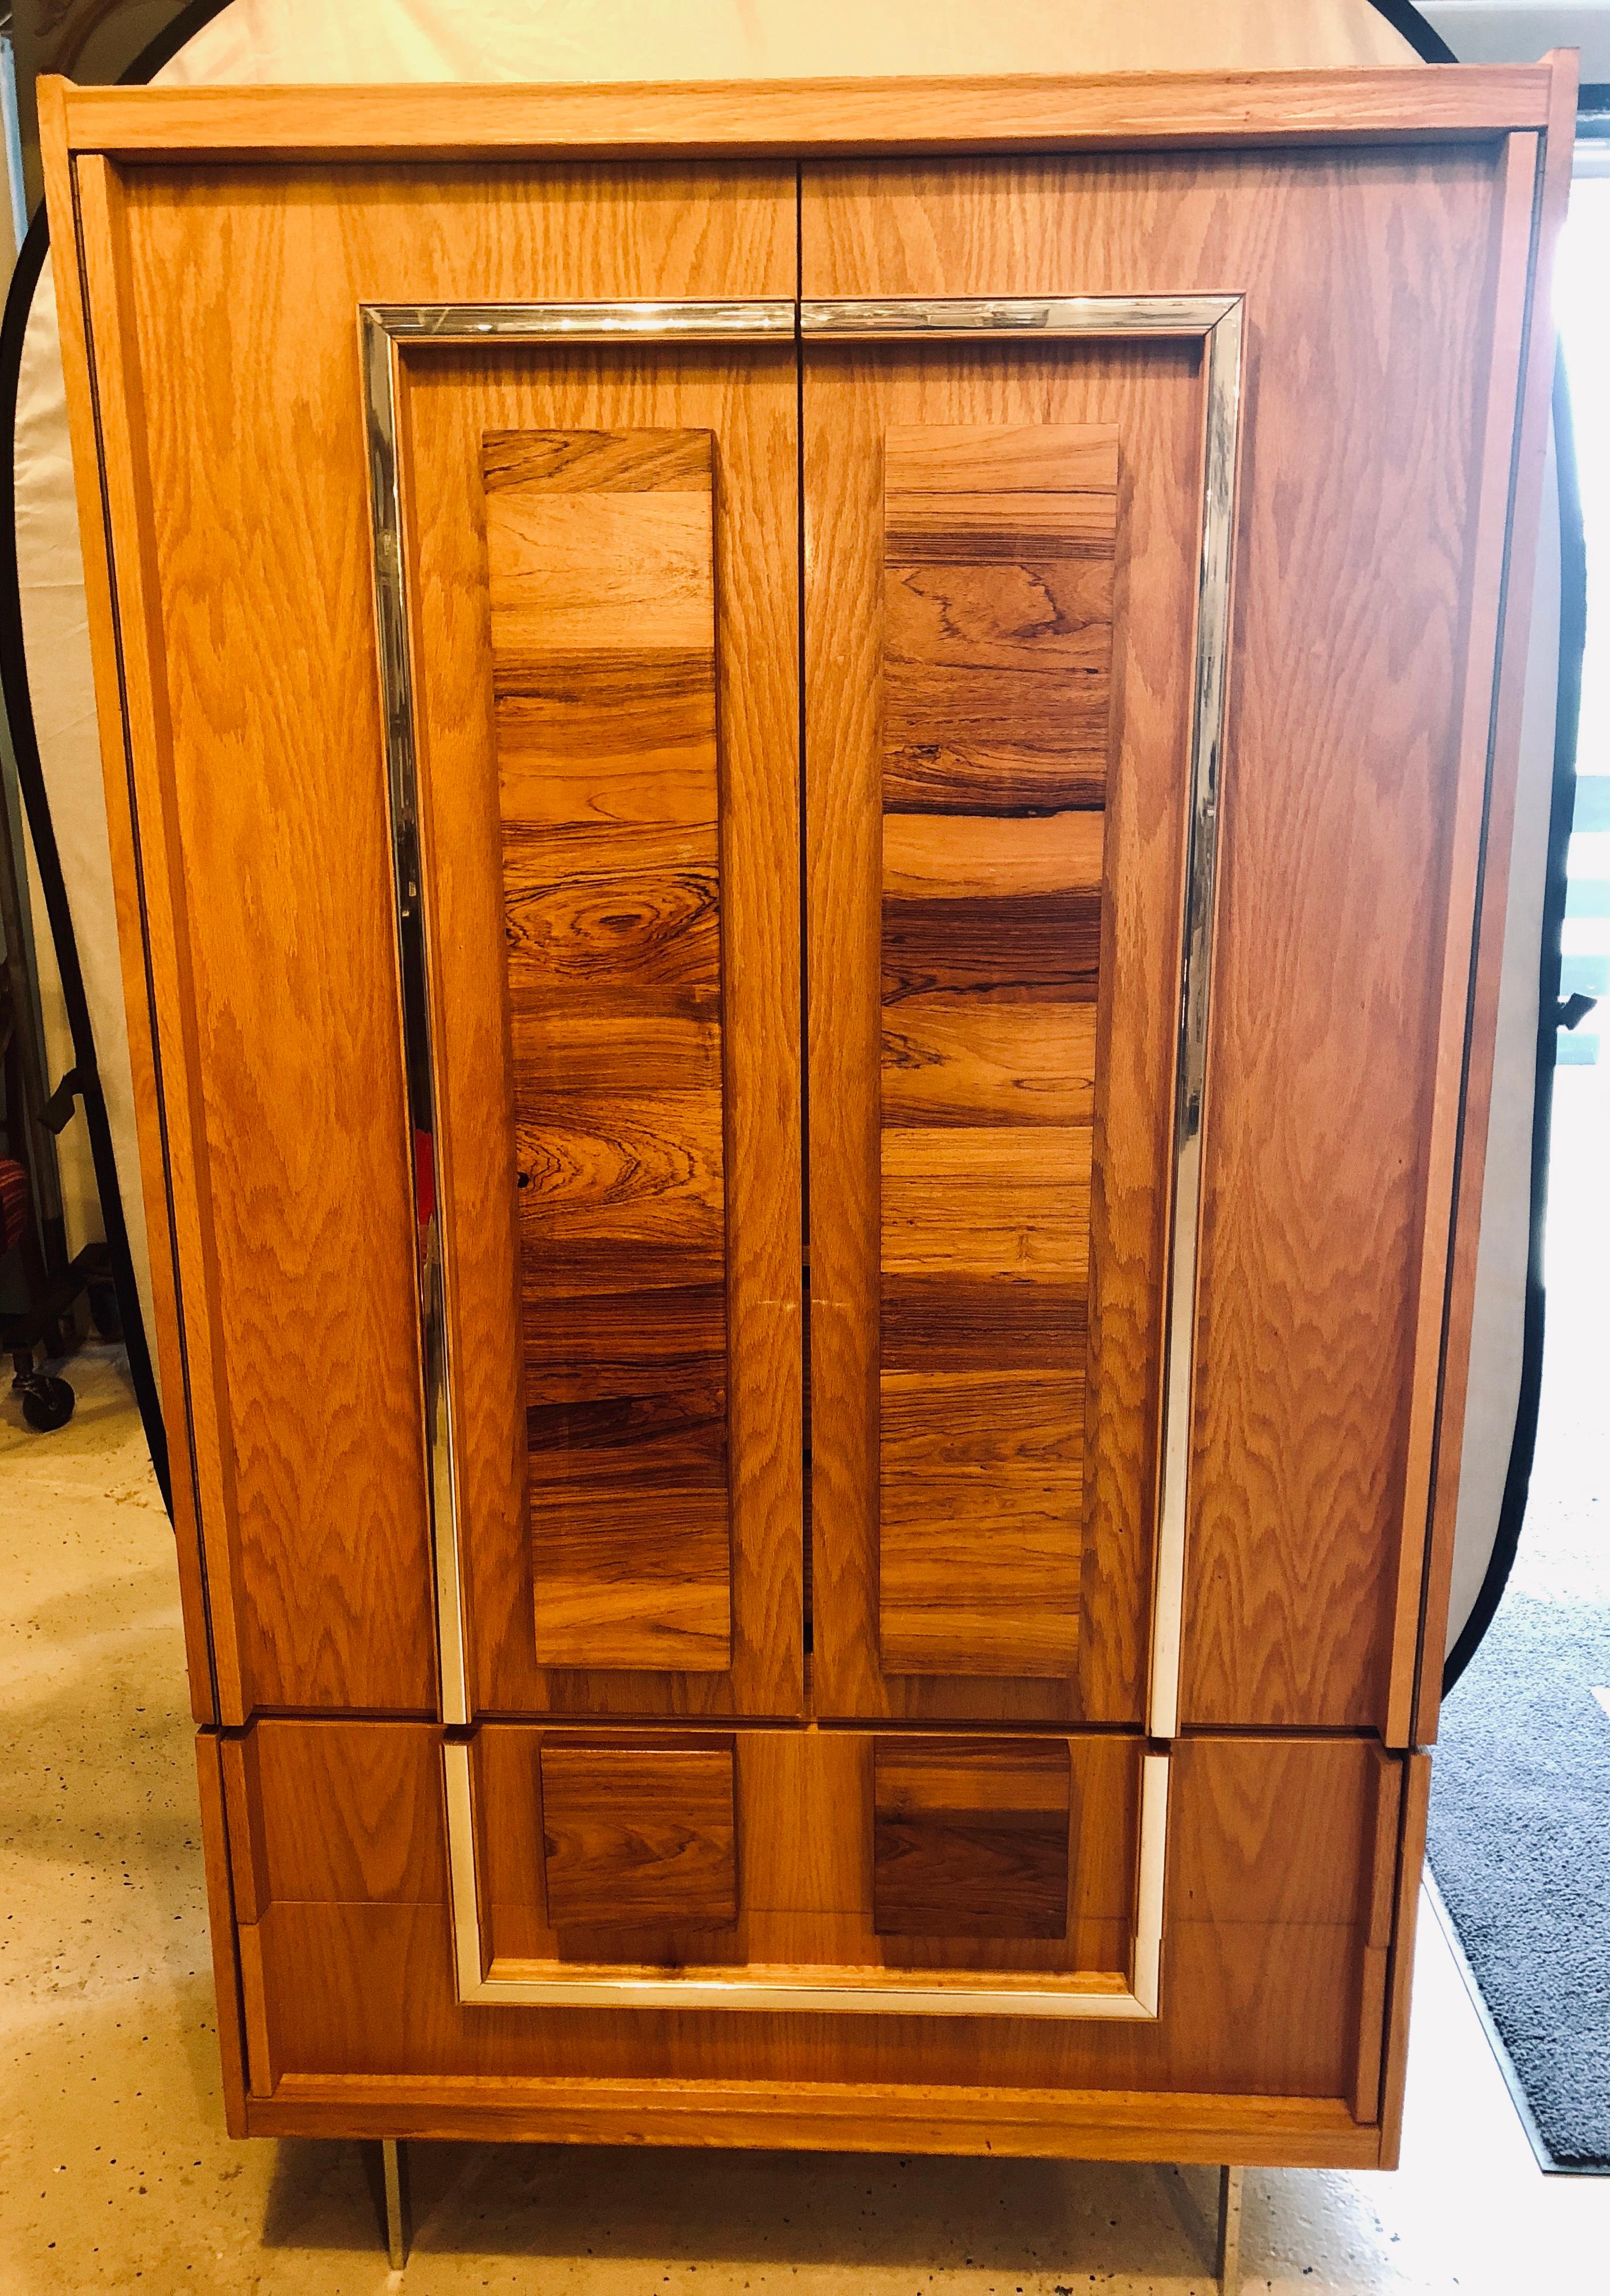 Stunning Mid-Century Modern two-piece custom quality Hi chest or armoire deigned after Milo Baughman. This fine wood and chrome chest is marked Made In Canada having rosewood and oak veneer accents on front supported by flat bar chrome legs. Two